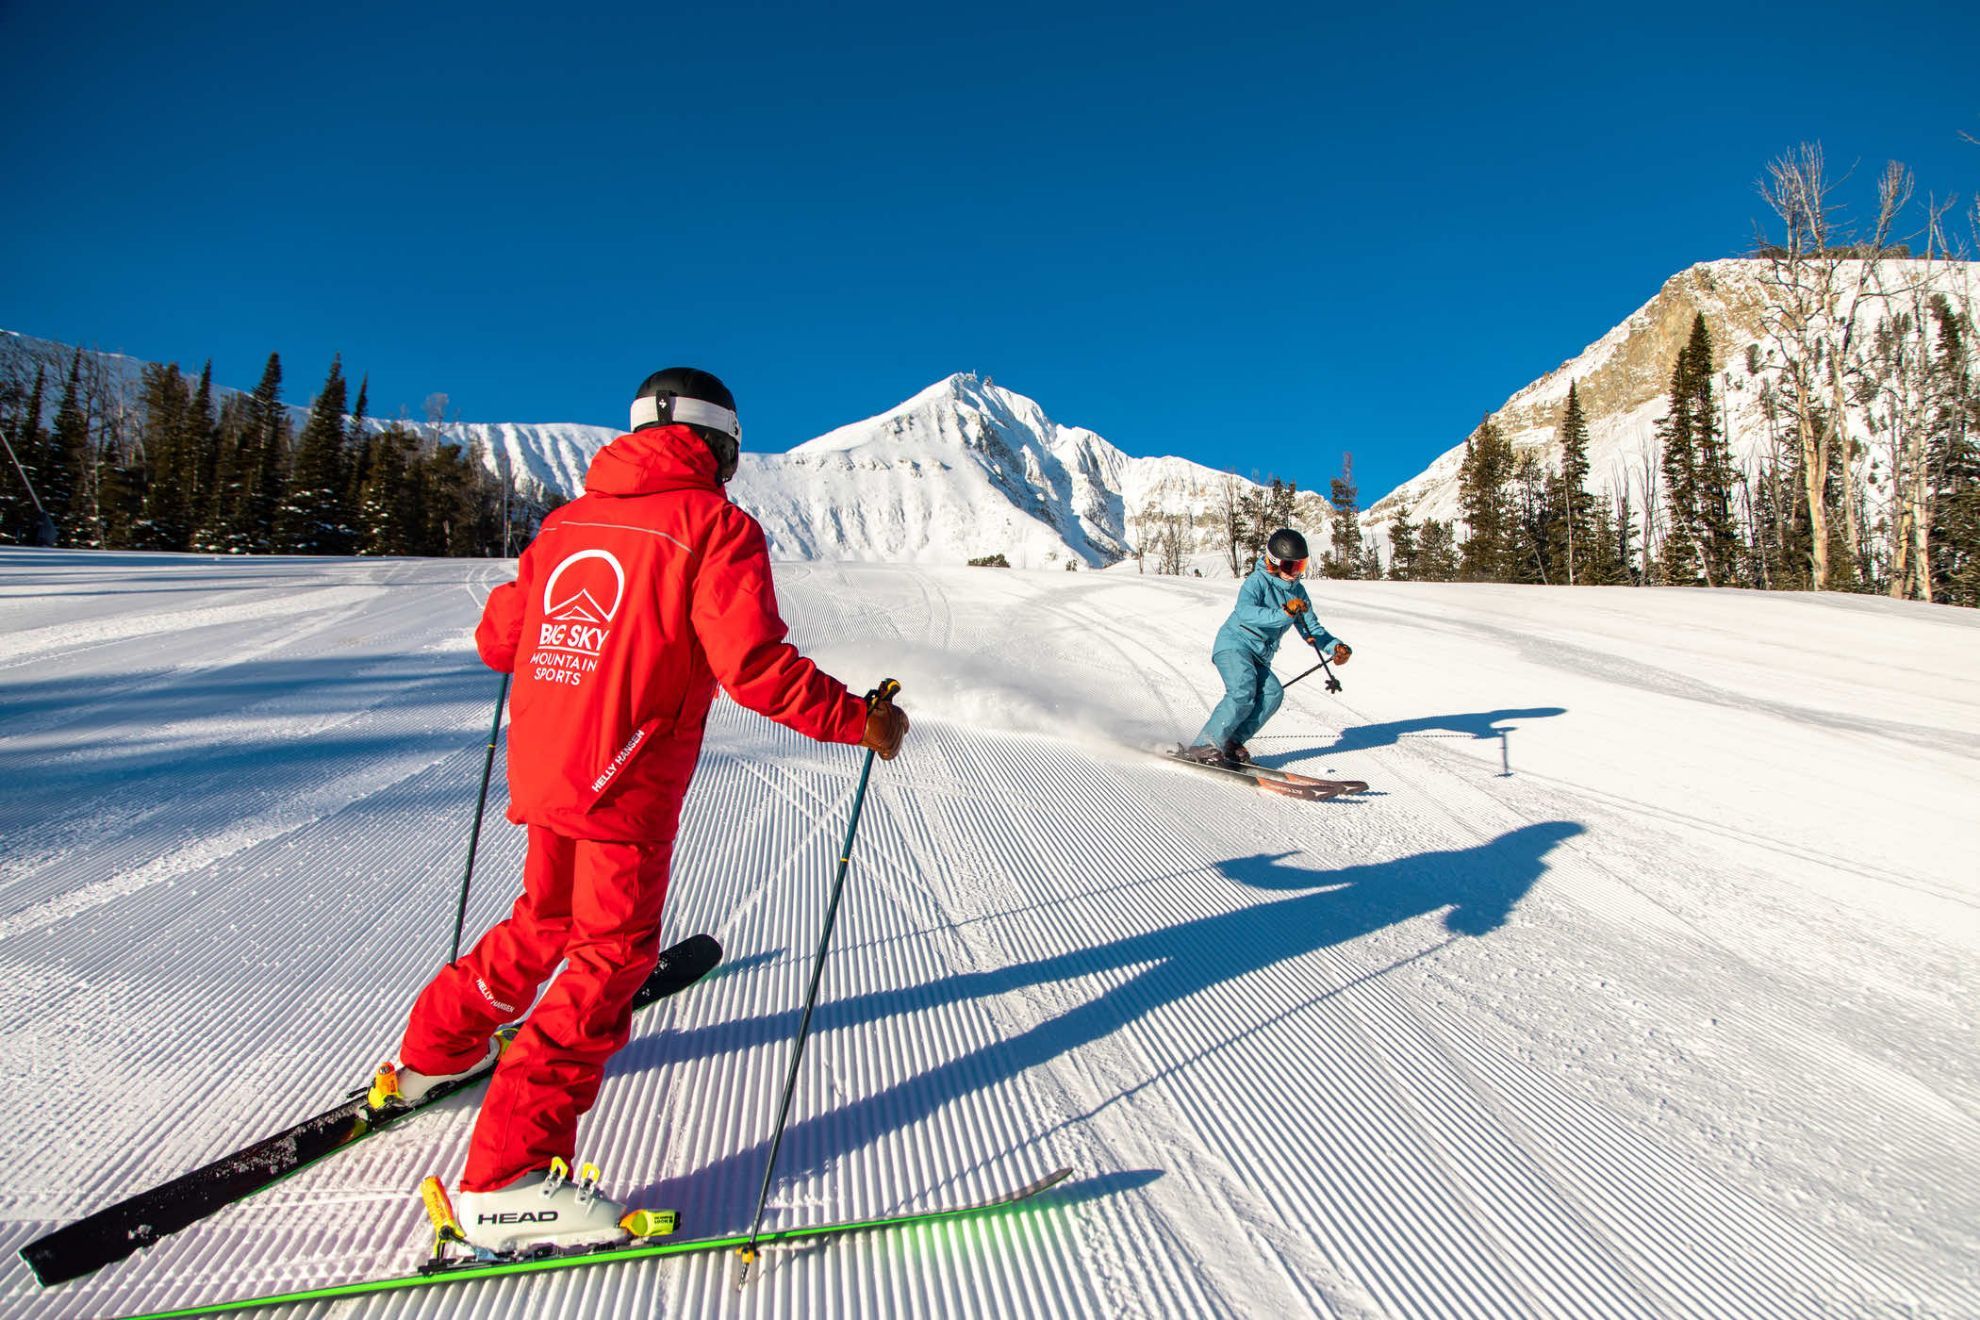 Instructor and Student Skiing